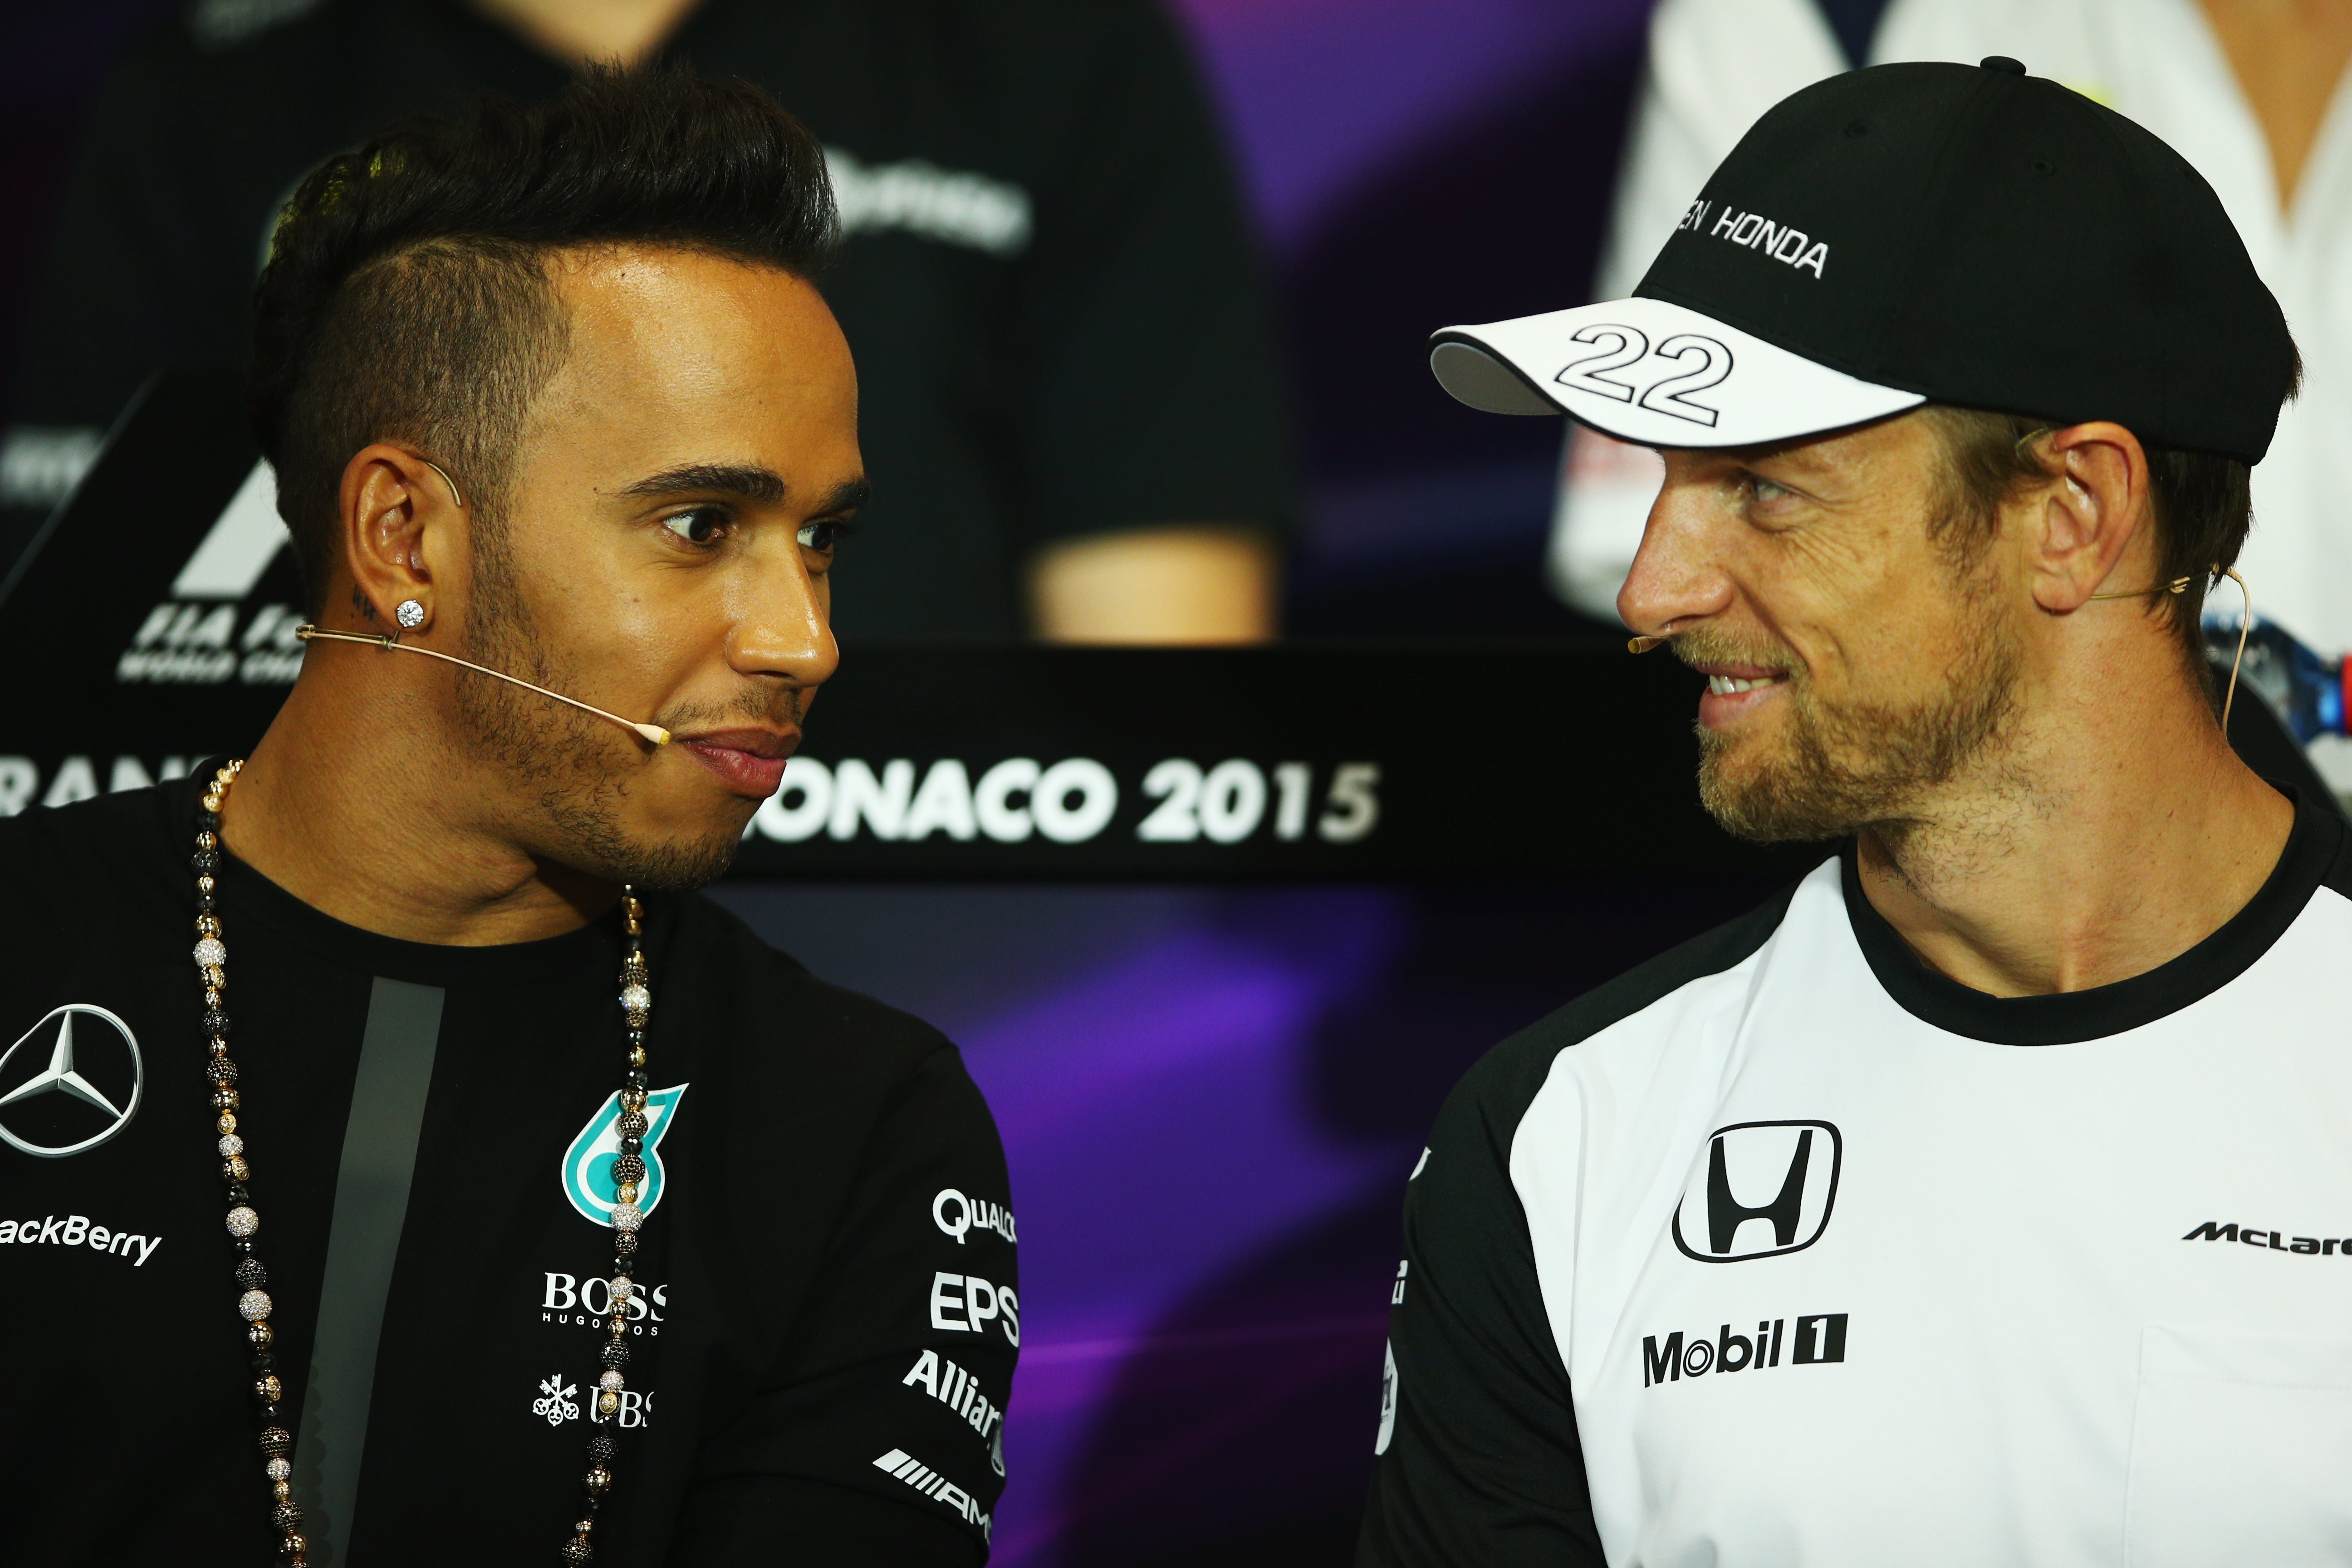 Jenson Button believes the time was right for Lewis Hamilton to take on a new challenge